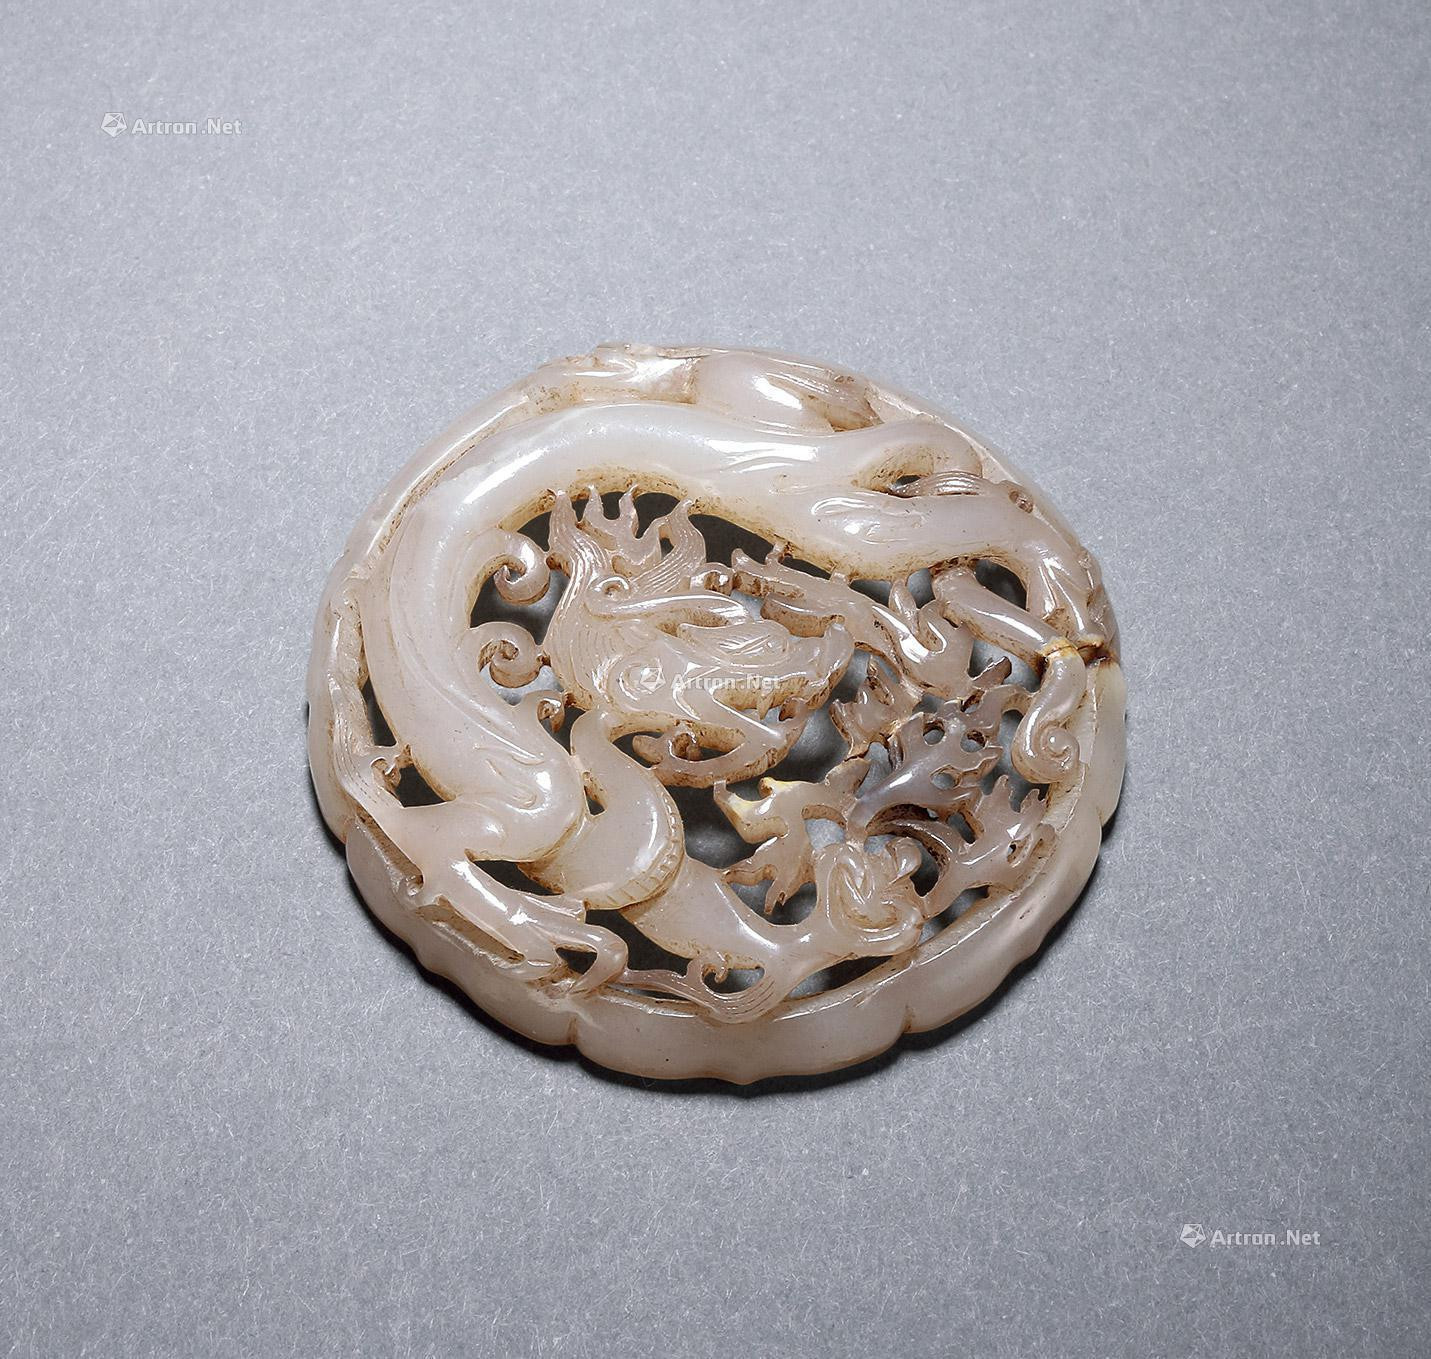 A PIERCED AND CARVED GREENISH JADE PENDANT WITH DESIGN OF DRAGON